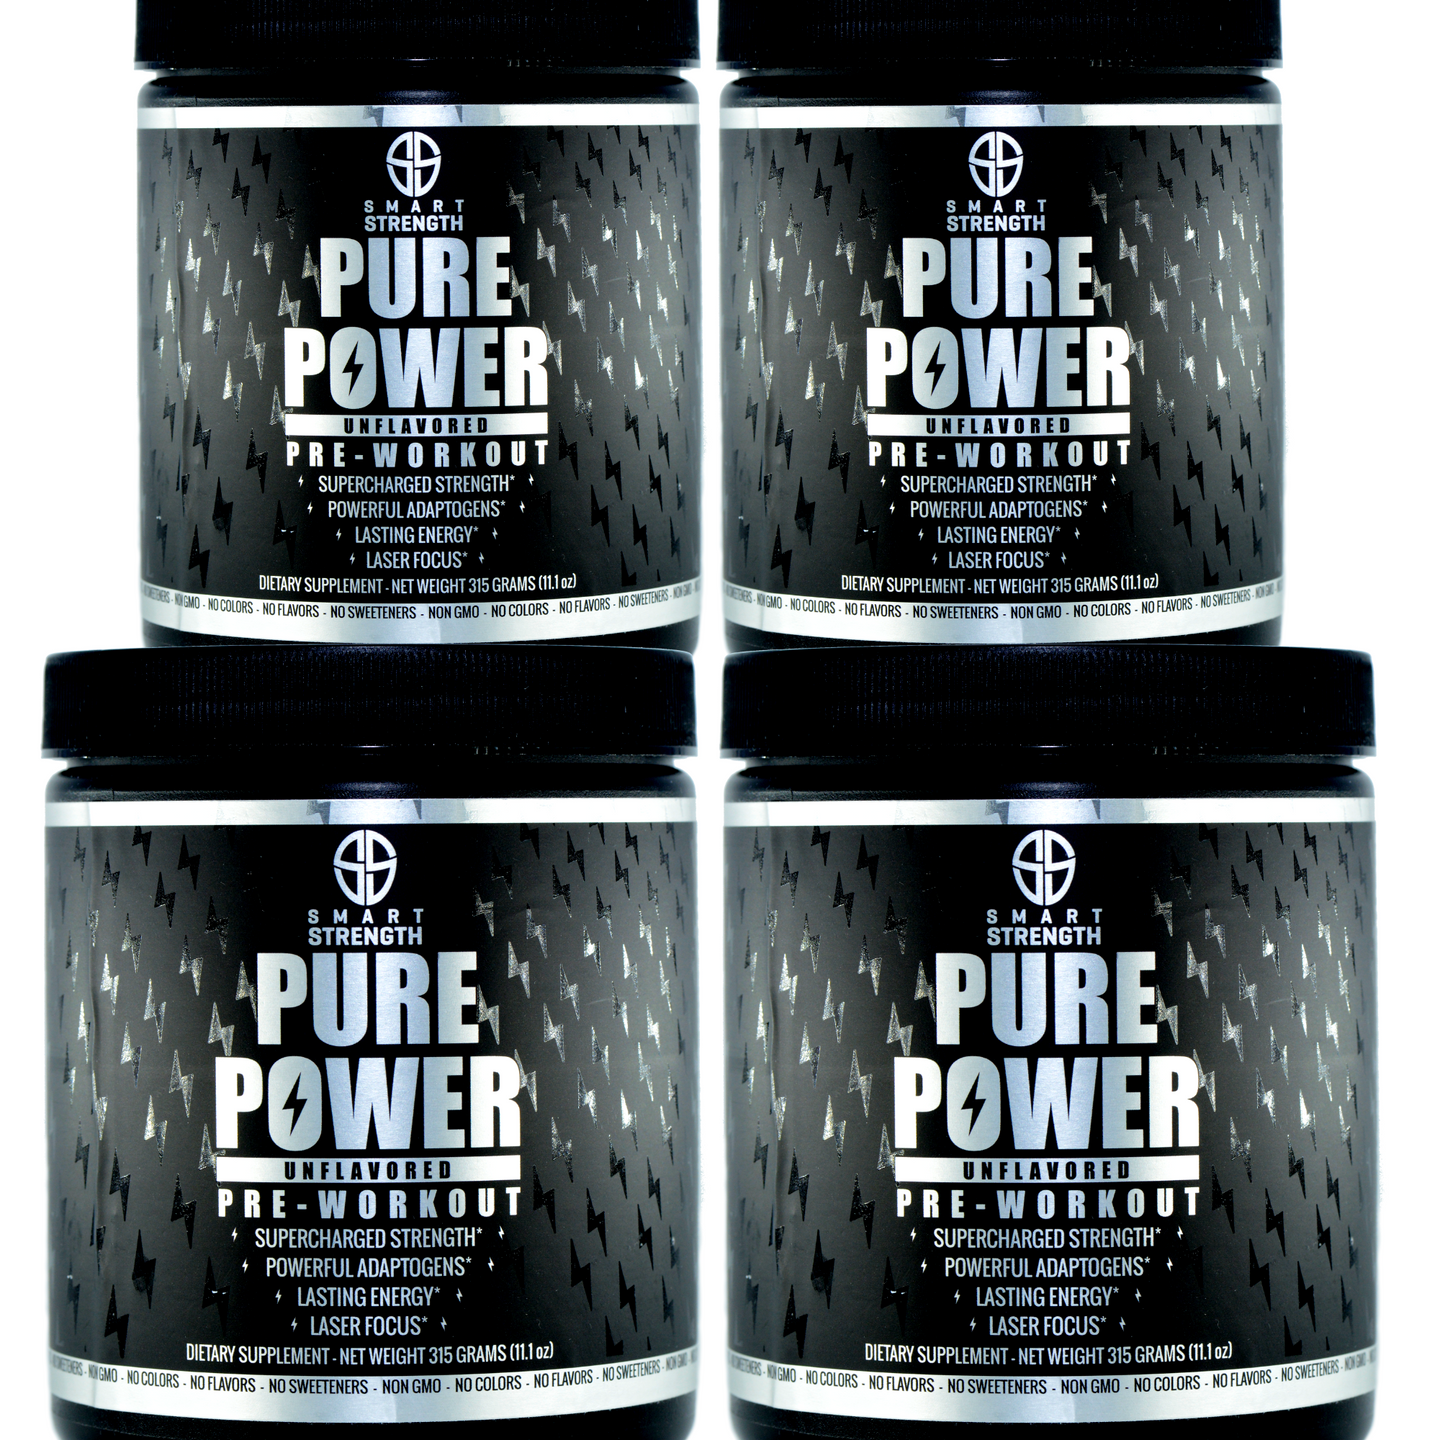 PURE POWER NATURAL PRE WORKOUT - Unflavored - Bundle of 4